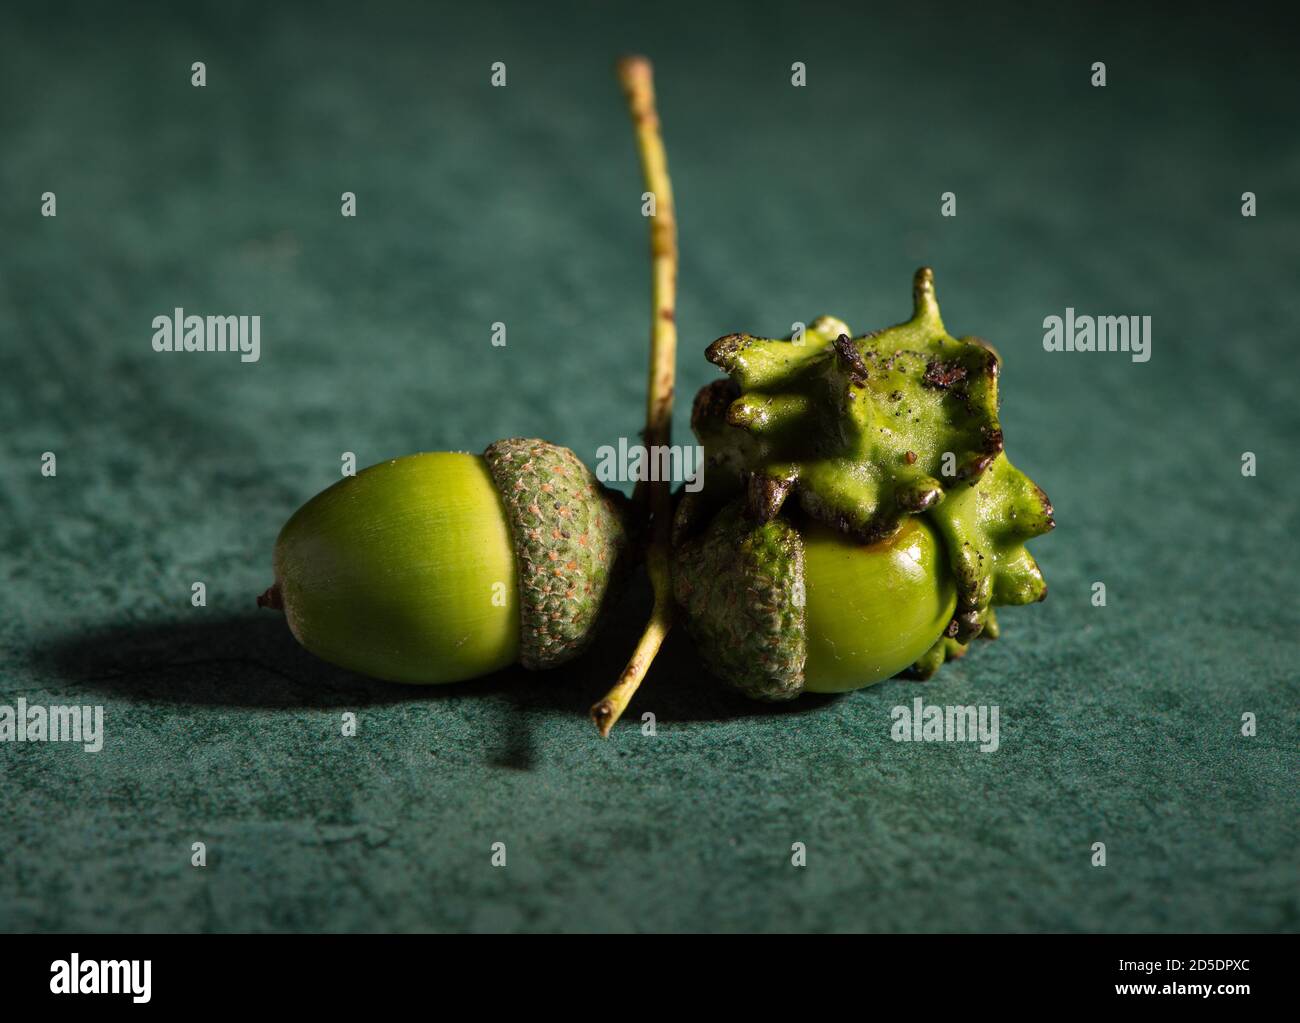 Two acorns on the same twig one perfect and one disfigured as a knopper gall. The image could be used as a concept image showing two sides of a story. Stock Photo